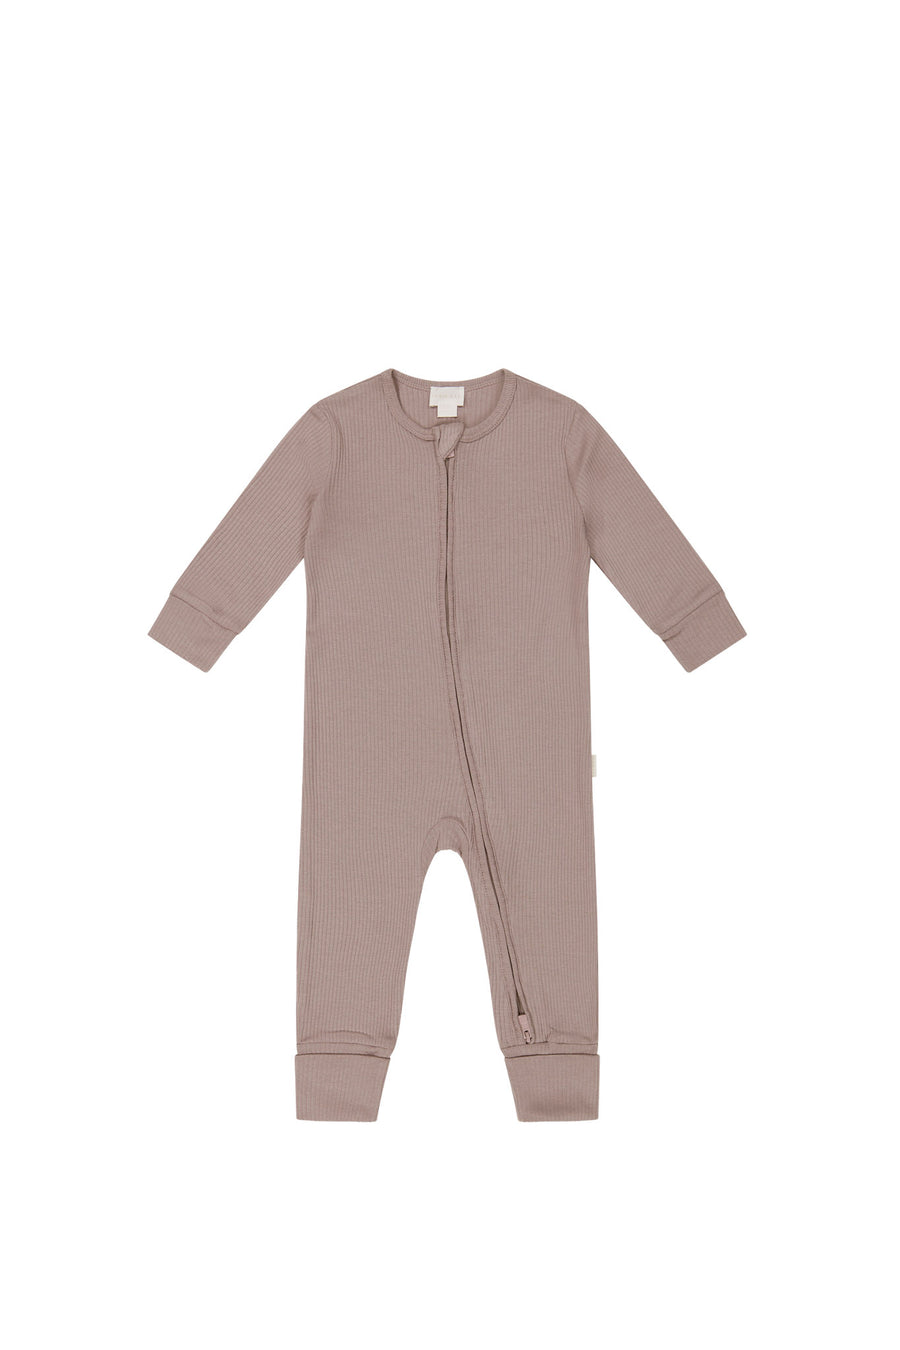 Organic Cotton Modal Gracelyn Zip Onepiece - Softest Mauve Childrens Onepiece from Jamie Kay NZ